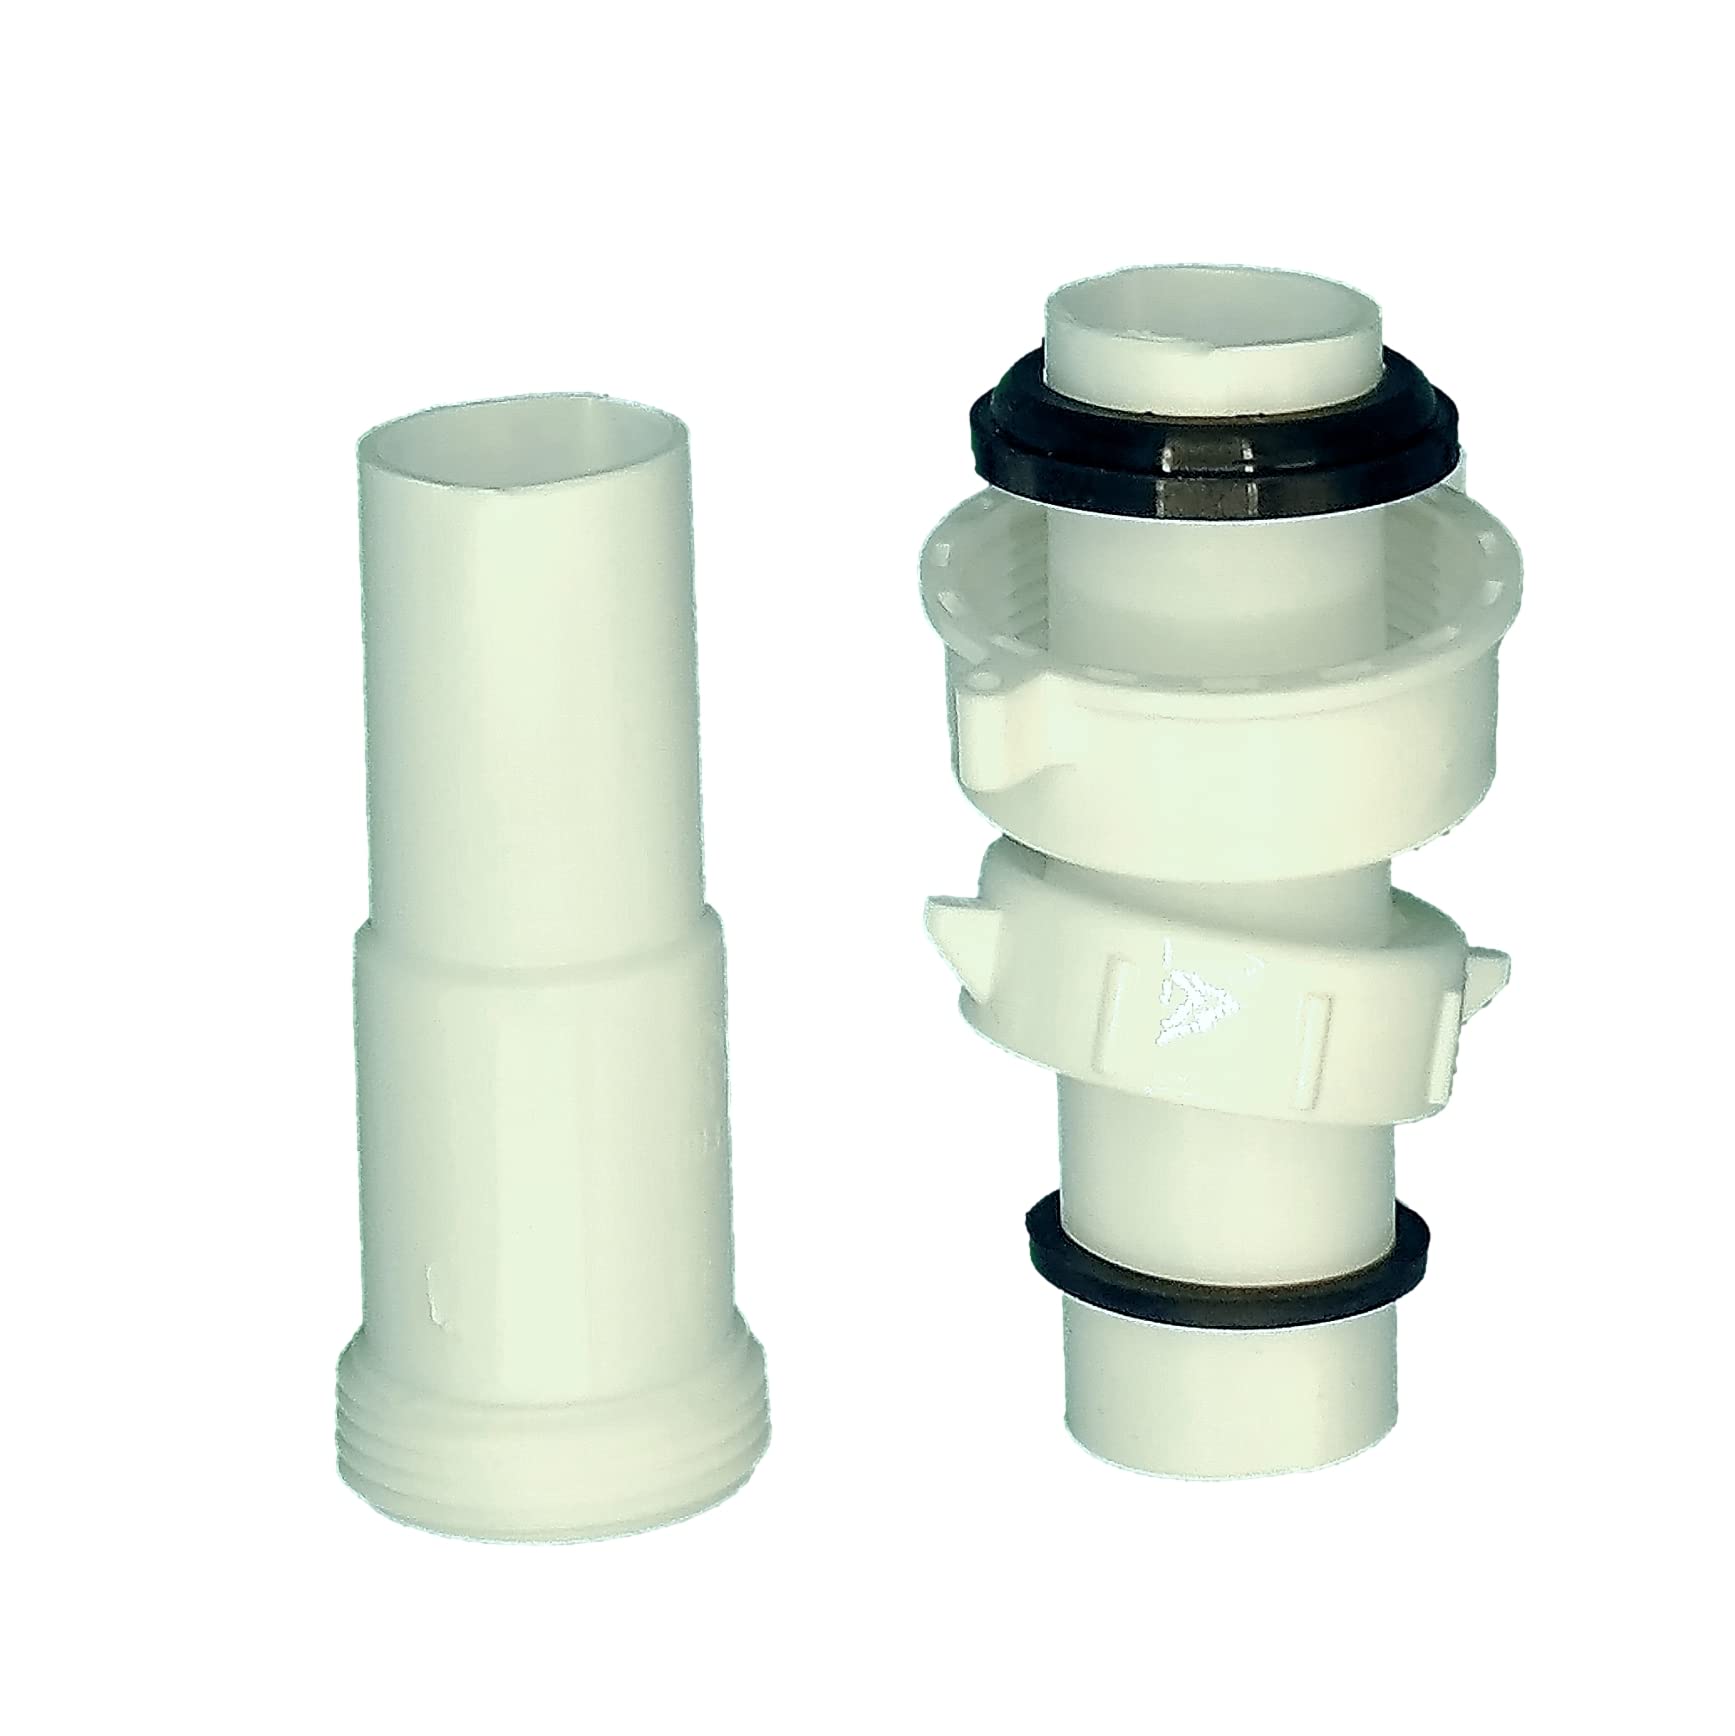 1 1 4 to 1 1 2 Sink Drain Adapter